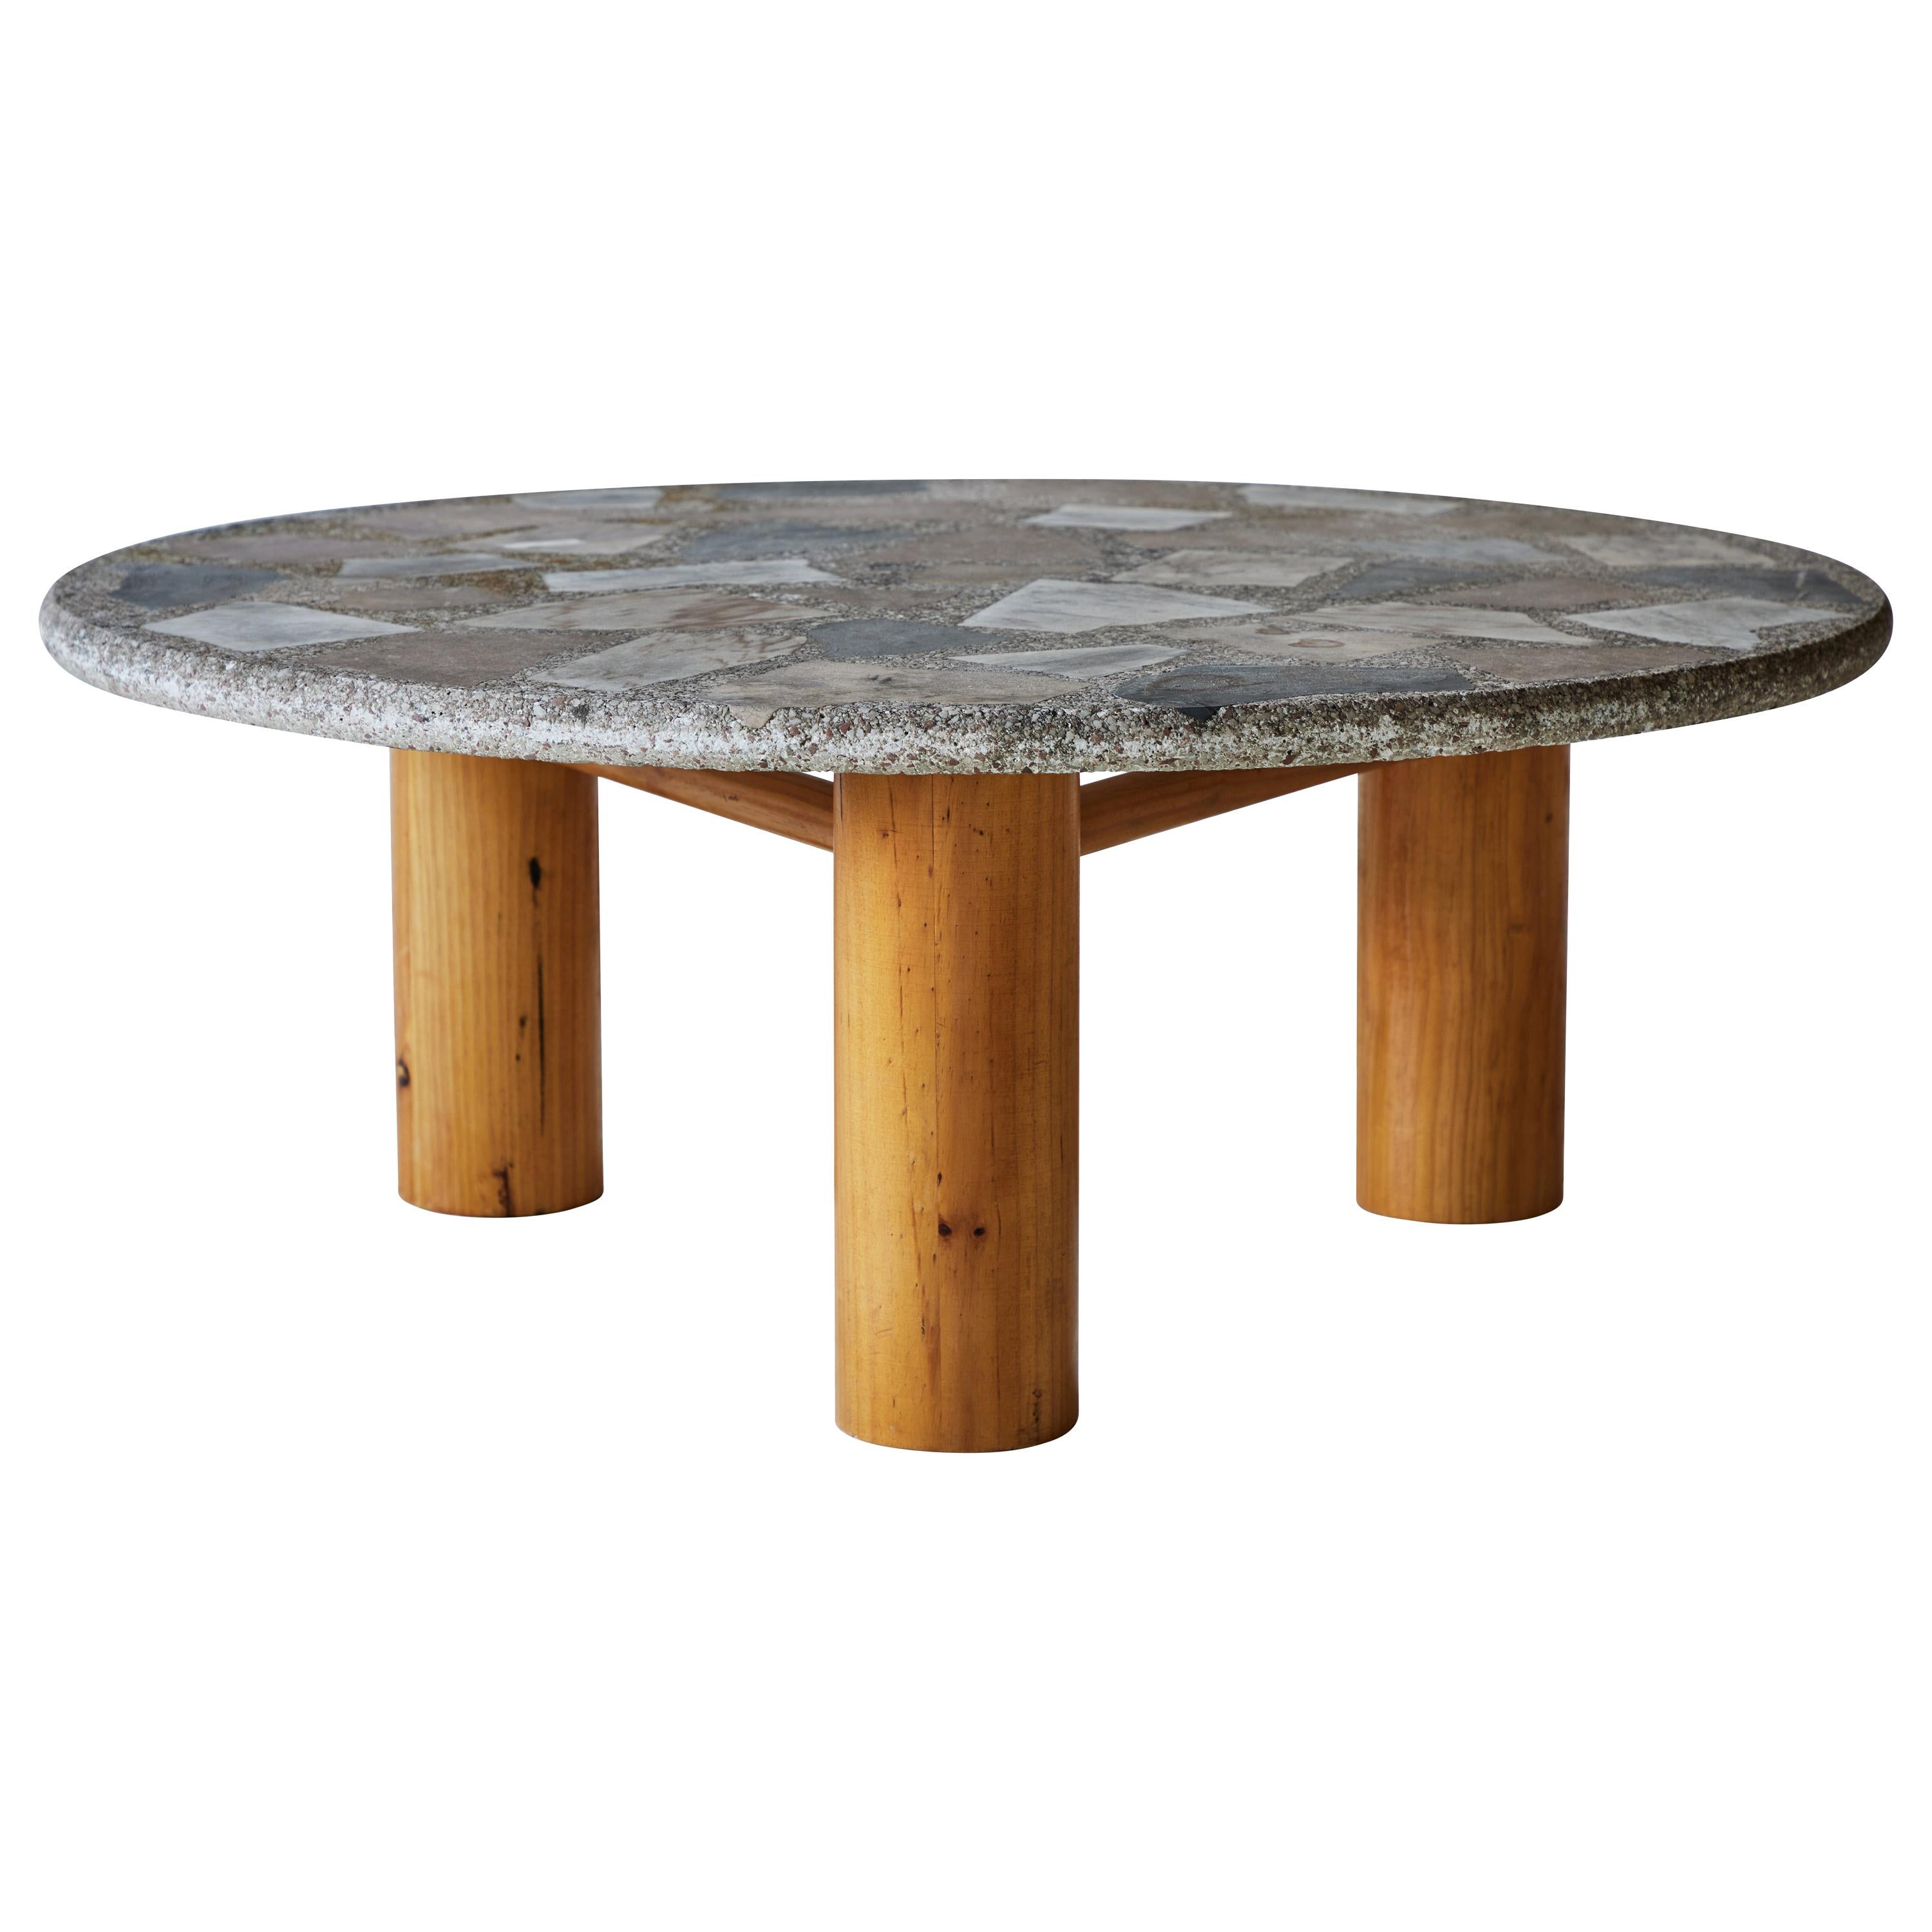 Vintage Round Terrazzo Table with Wooden Base